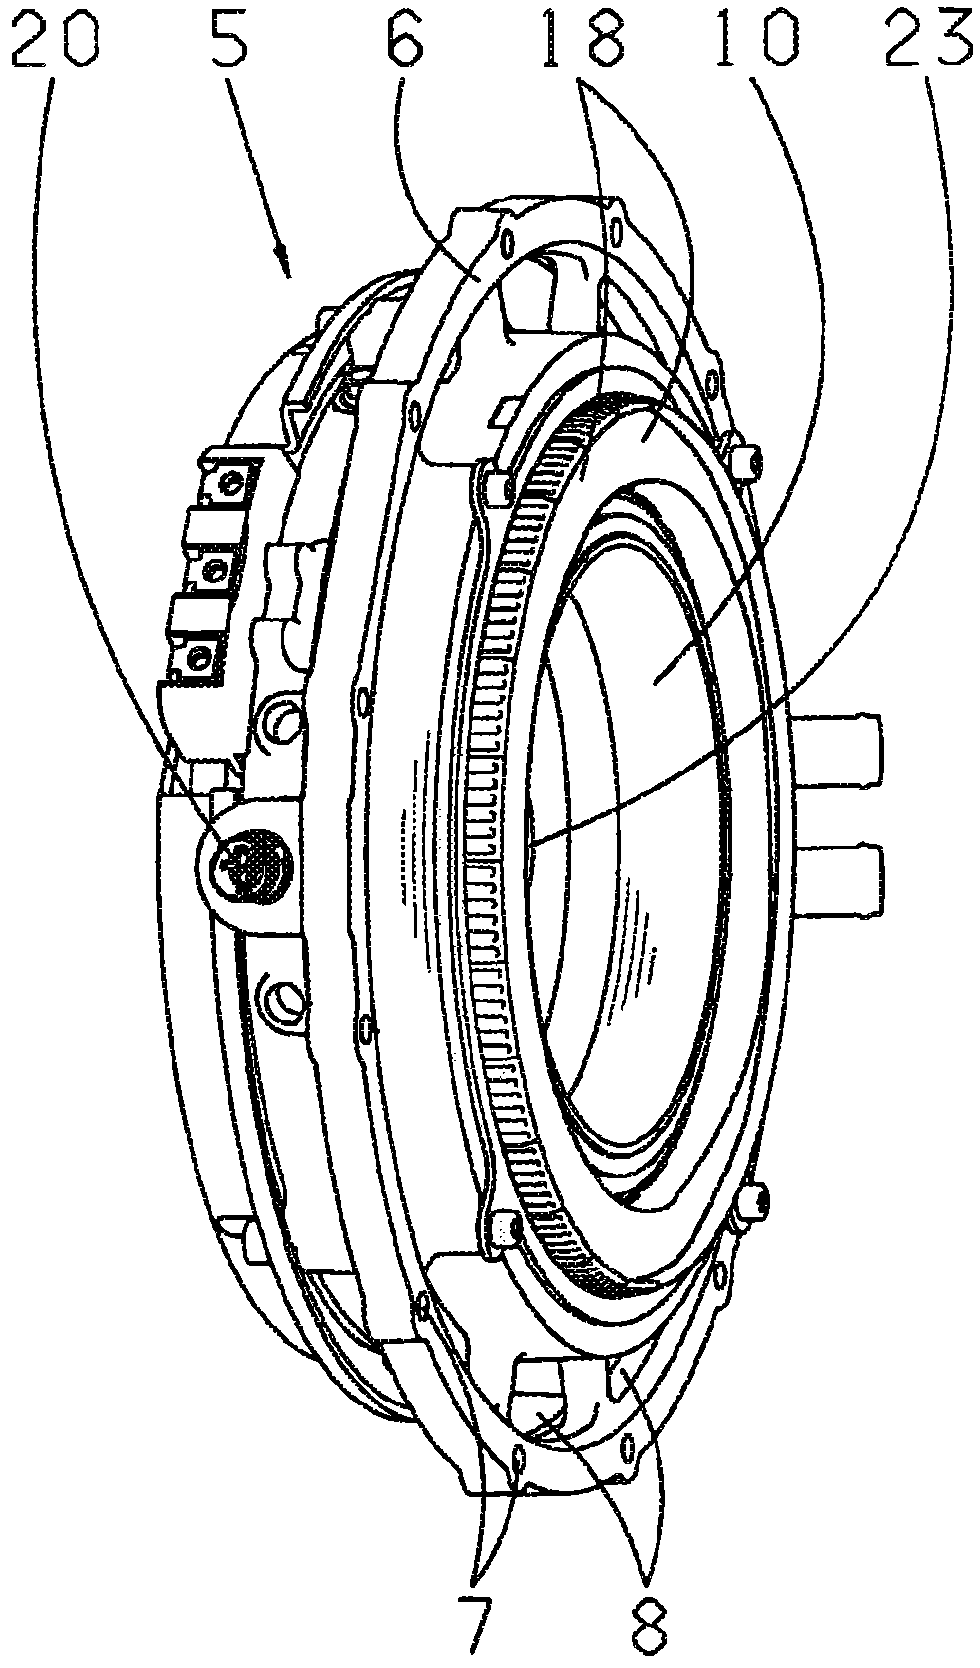 Electric machine comprising a stator support for a hybrid drive train